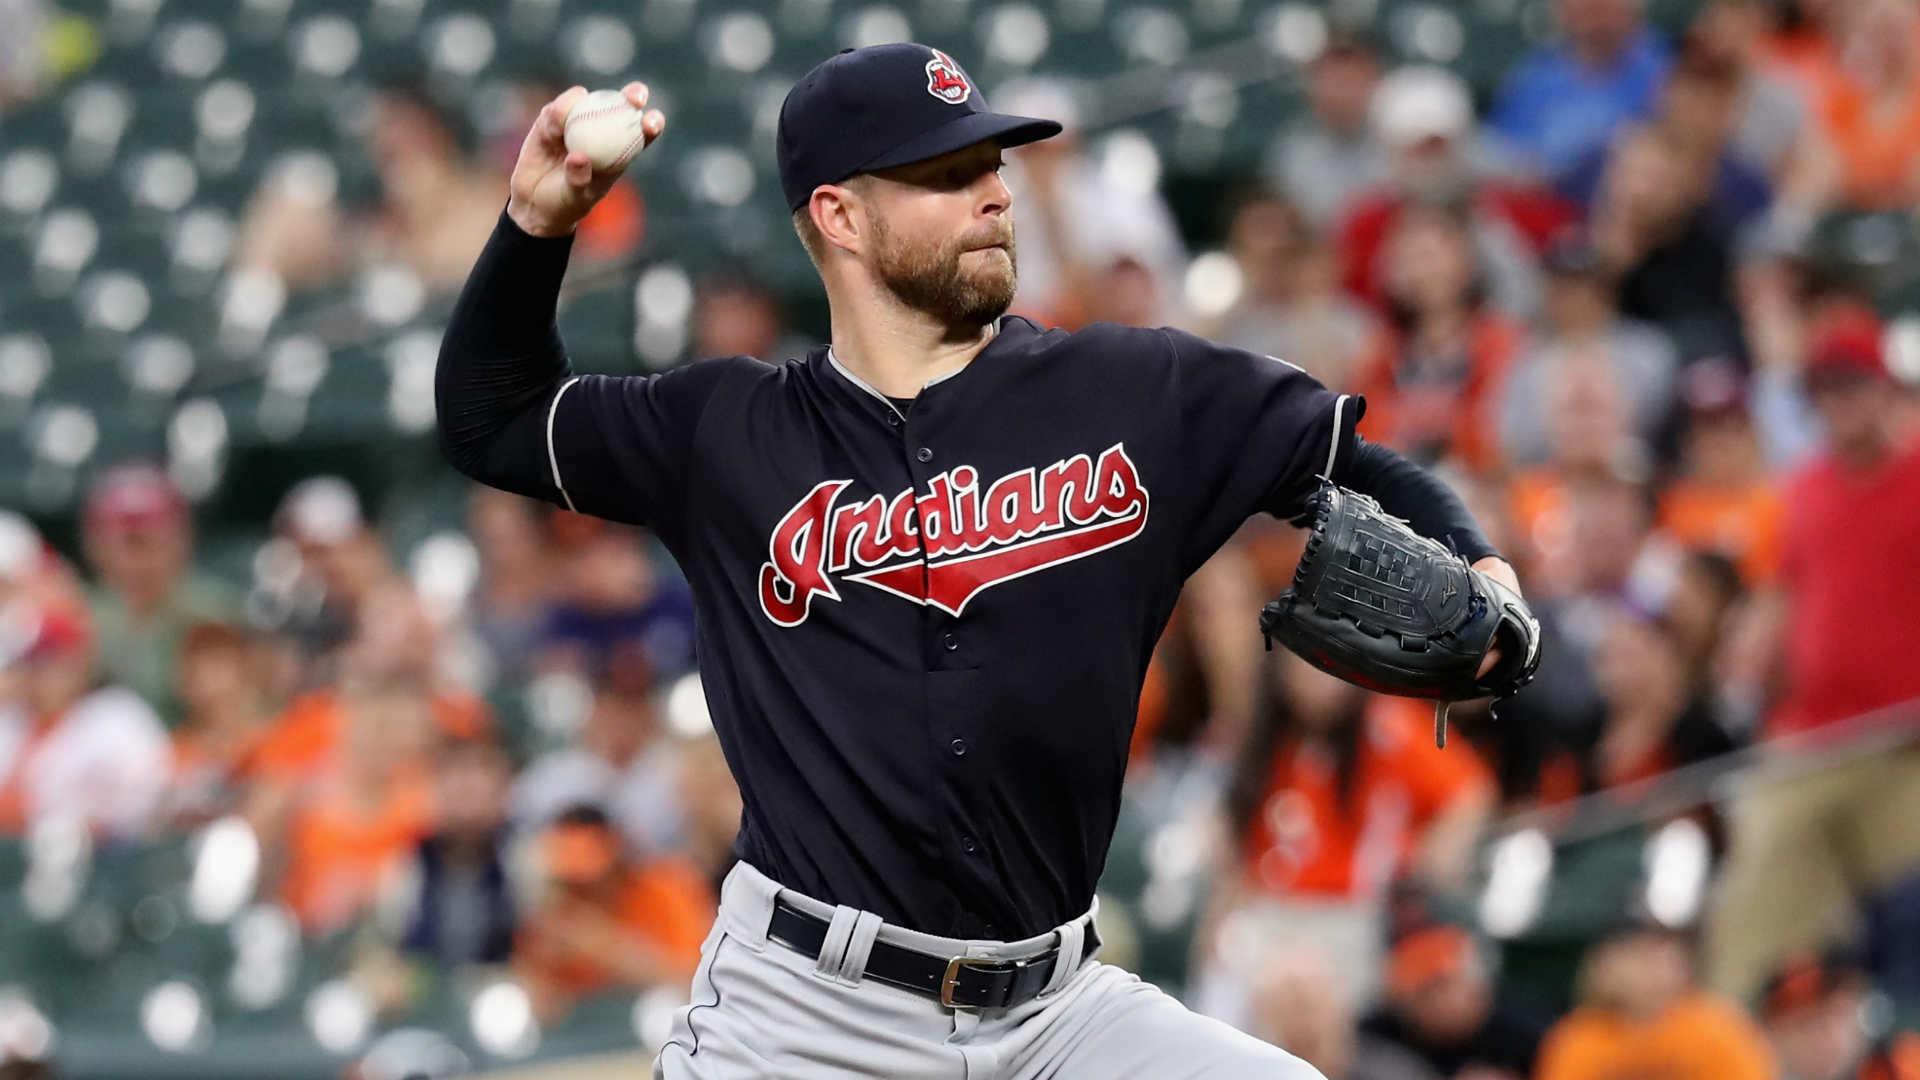 MLB trade rumors: Dodgers, Indians discussing trade for Corey Kluber